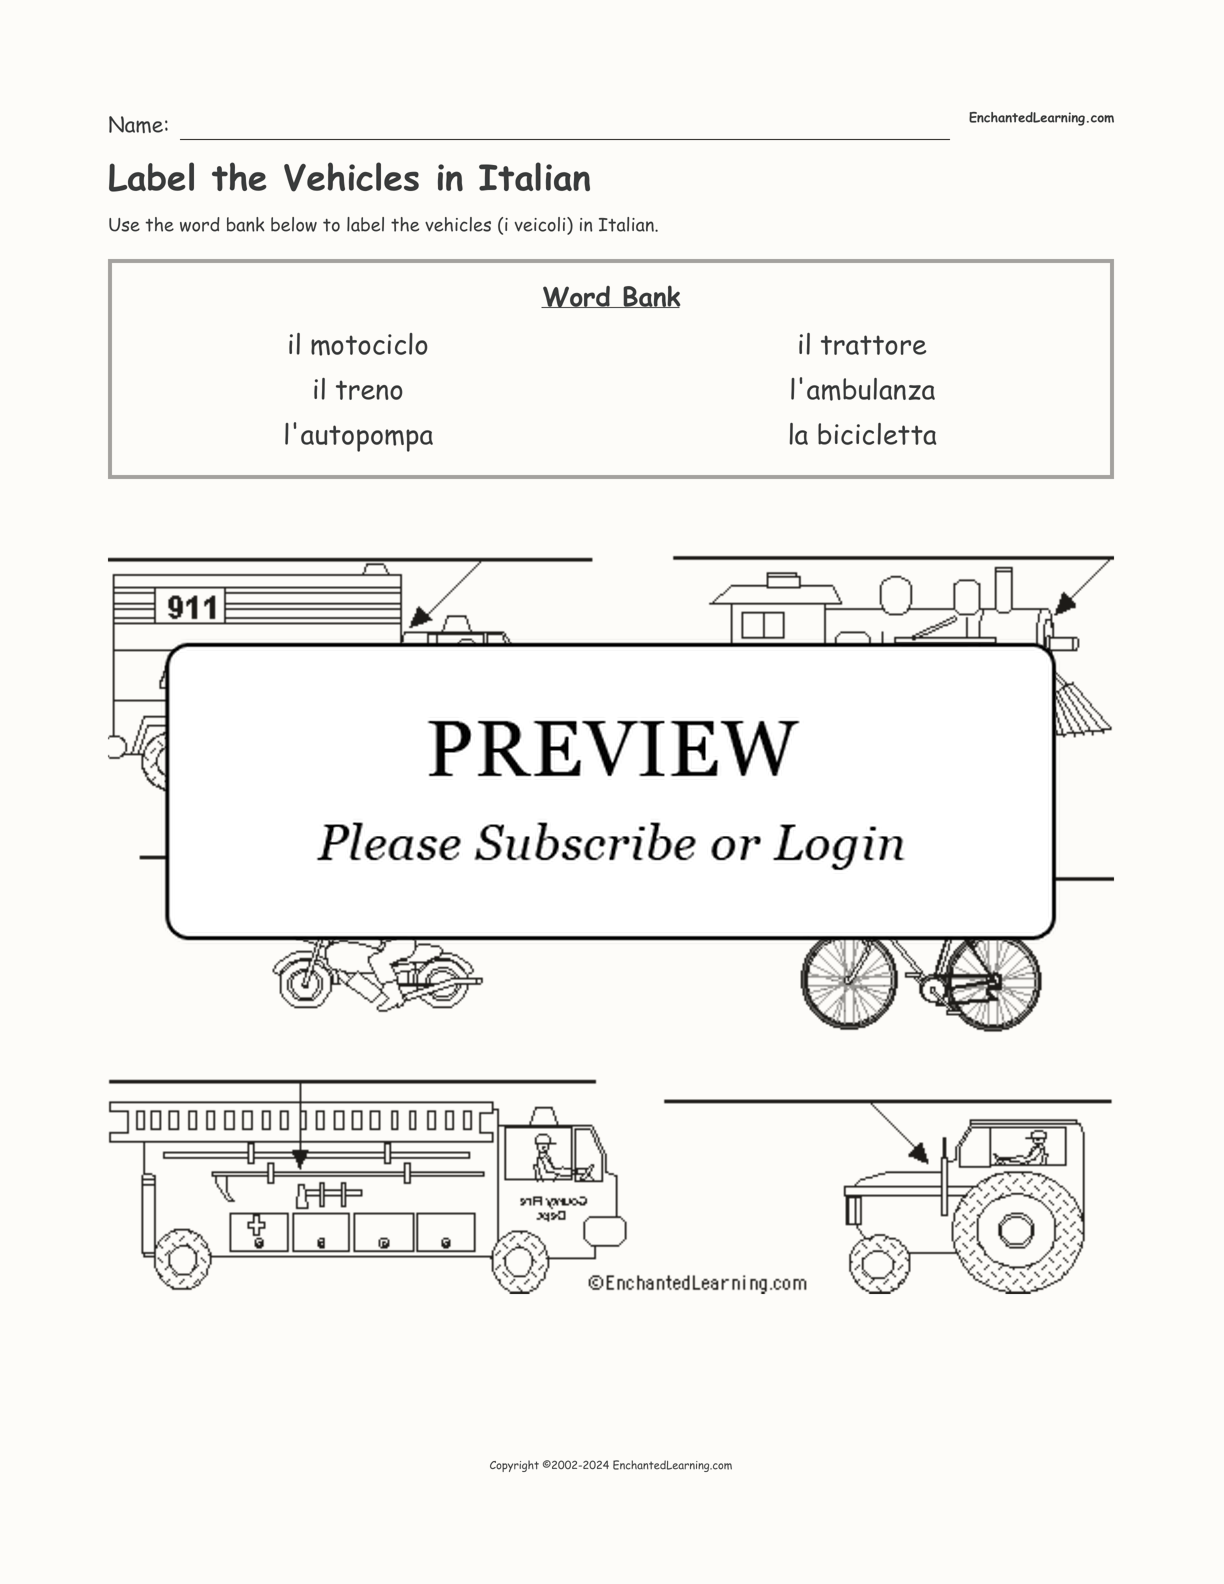 Label the Vehicles in Italian interactive worksheet page 1